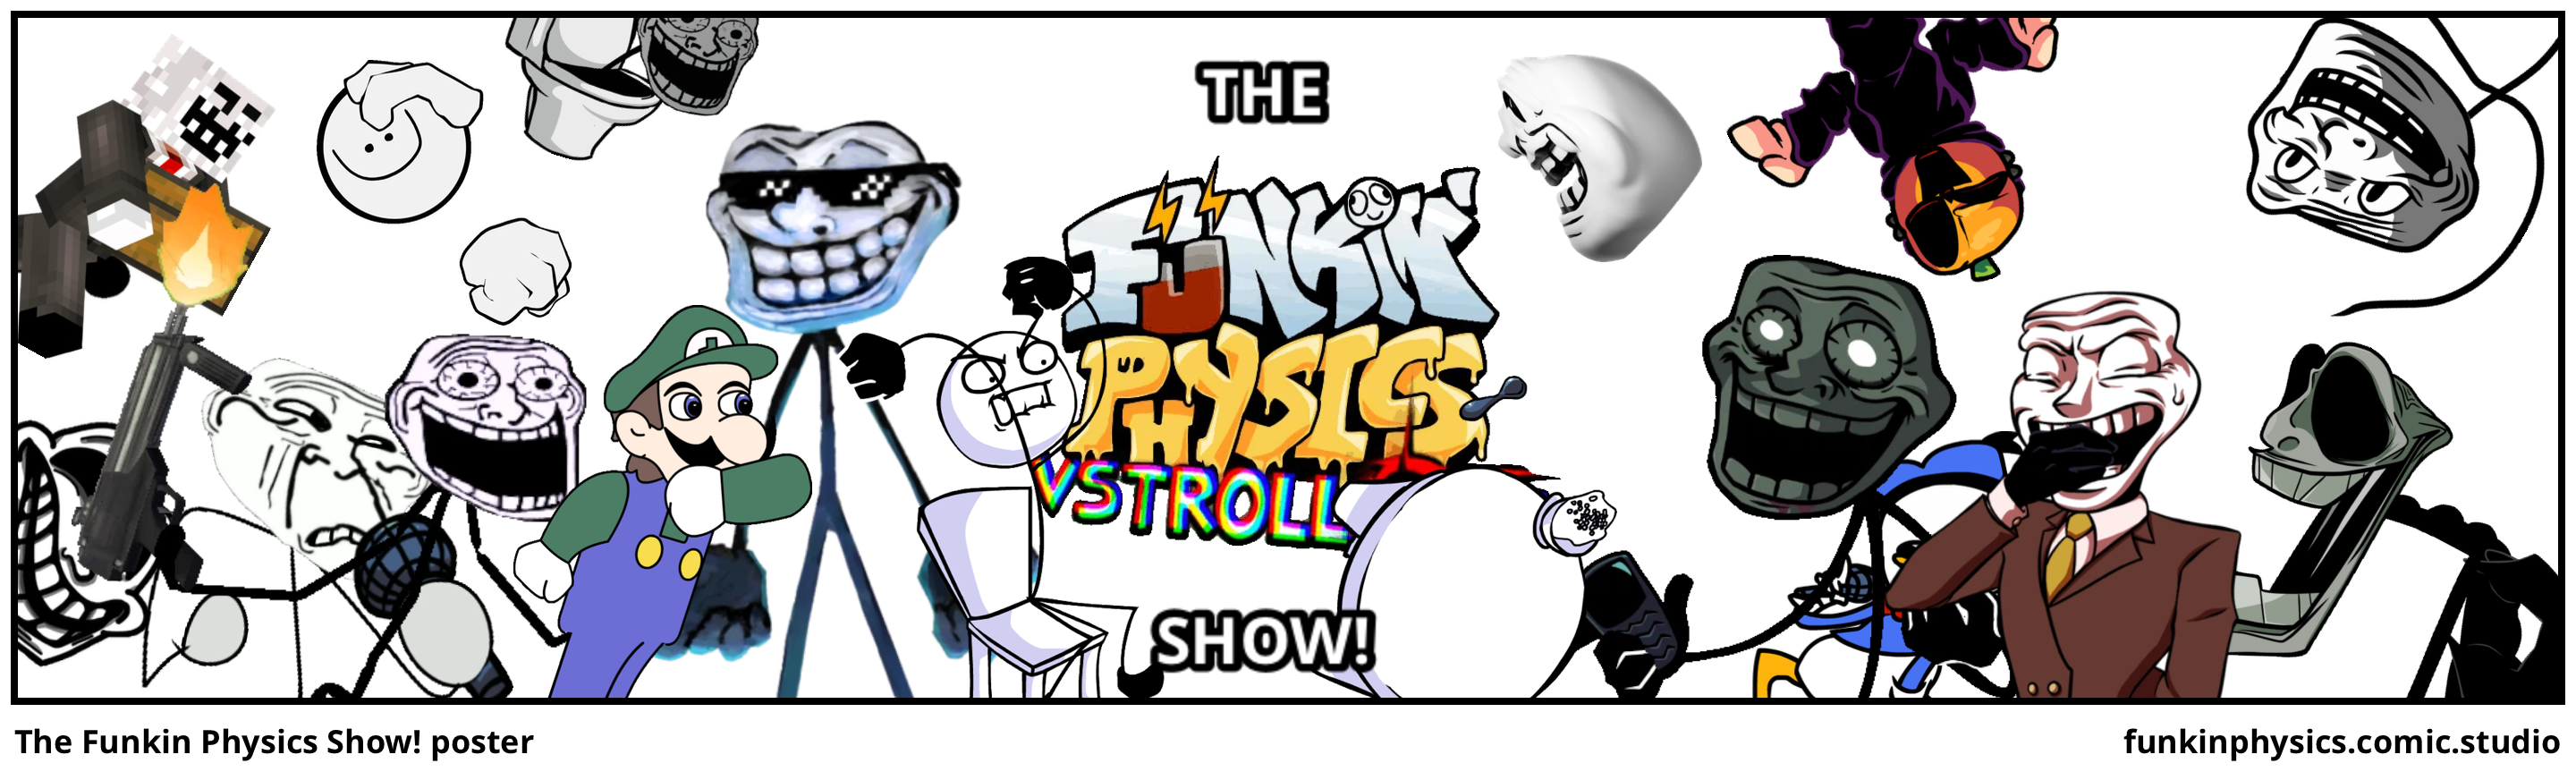 The Funkin Physics Show! poster